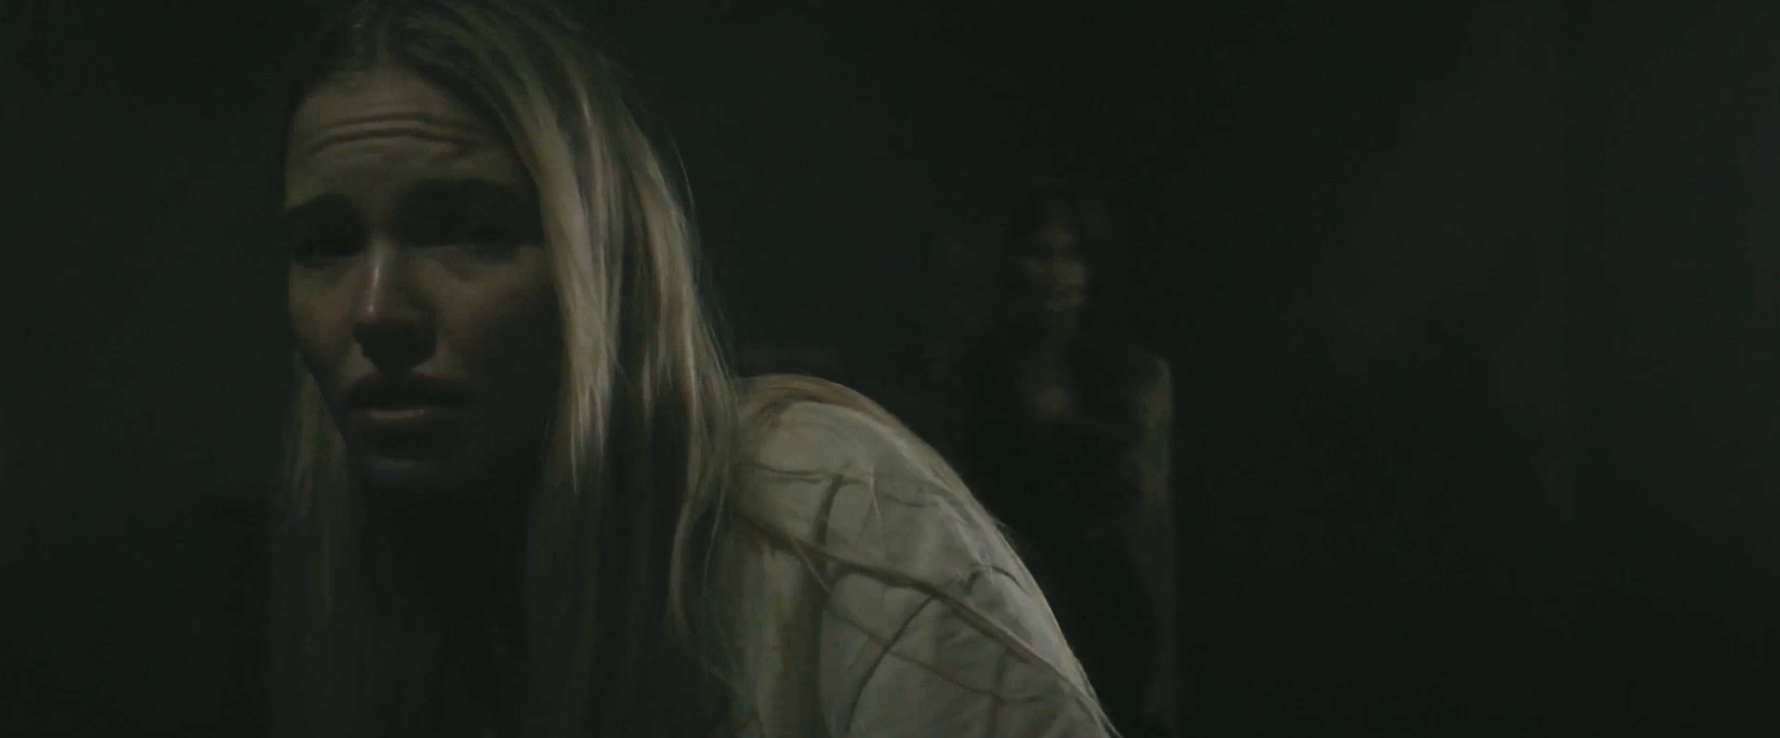 A woman with long, straight hair looks scared, leaning away from a shadowy figure in the background